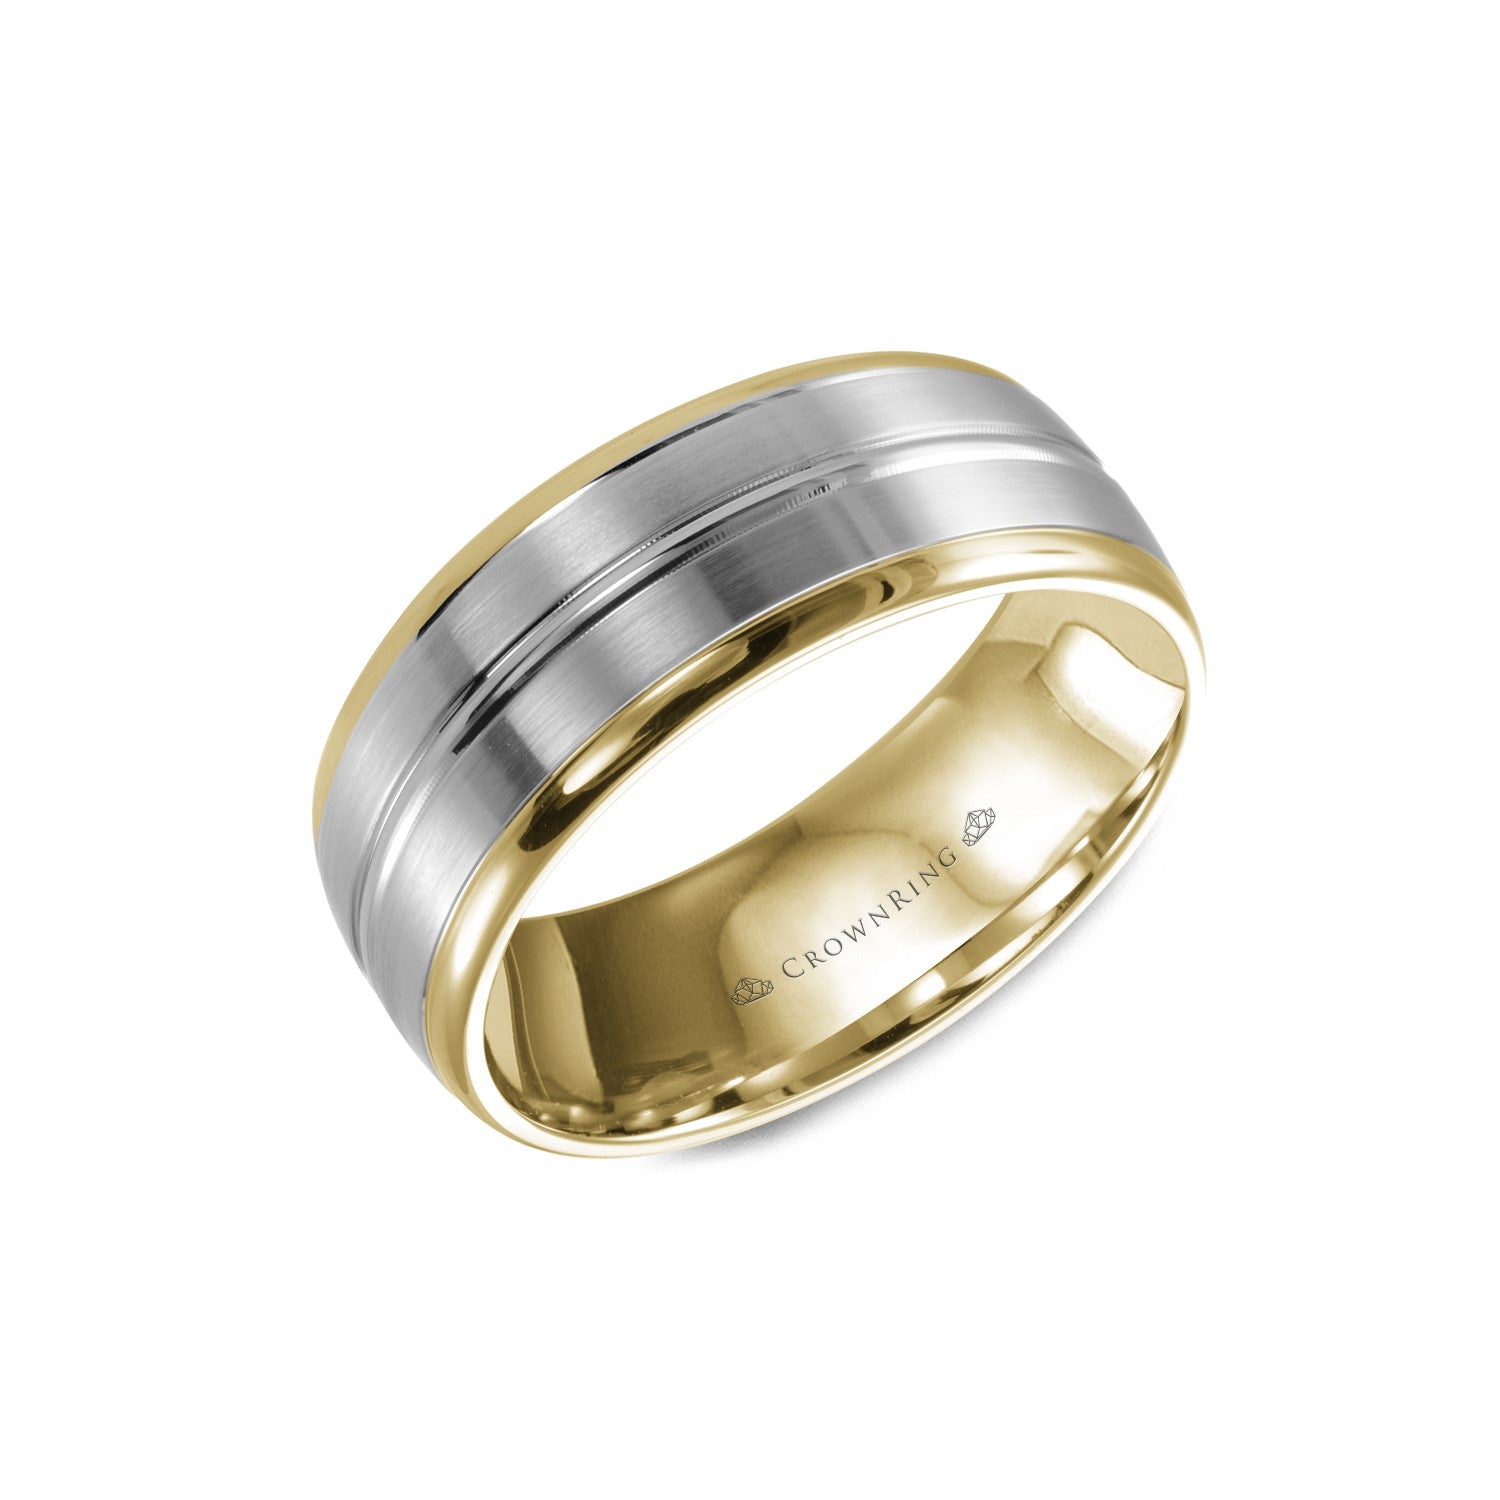 8mm Wedding Band With Sandpaper Top High Polished Grooves & Edges